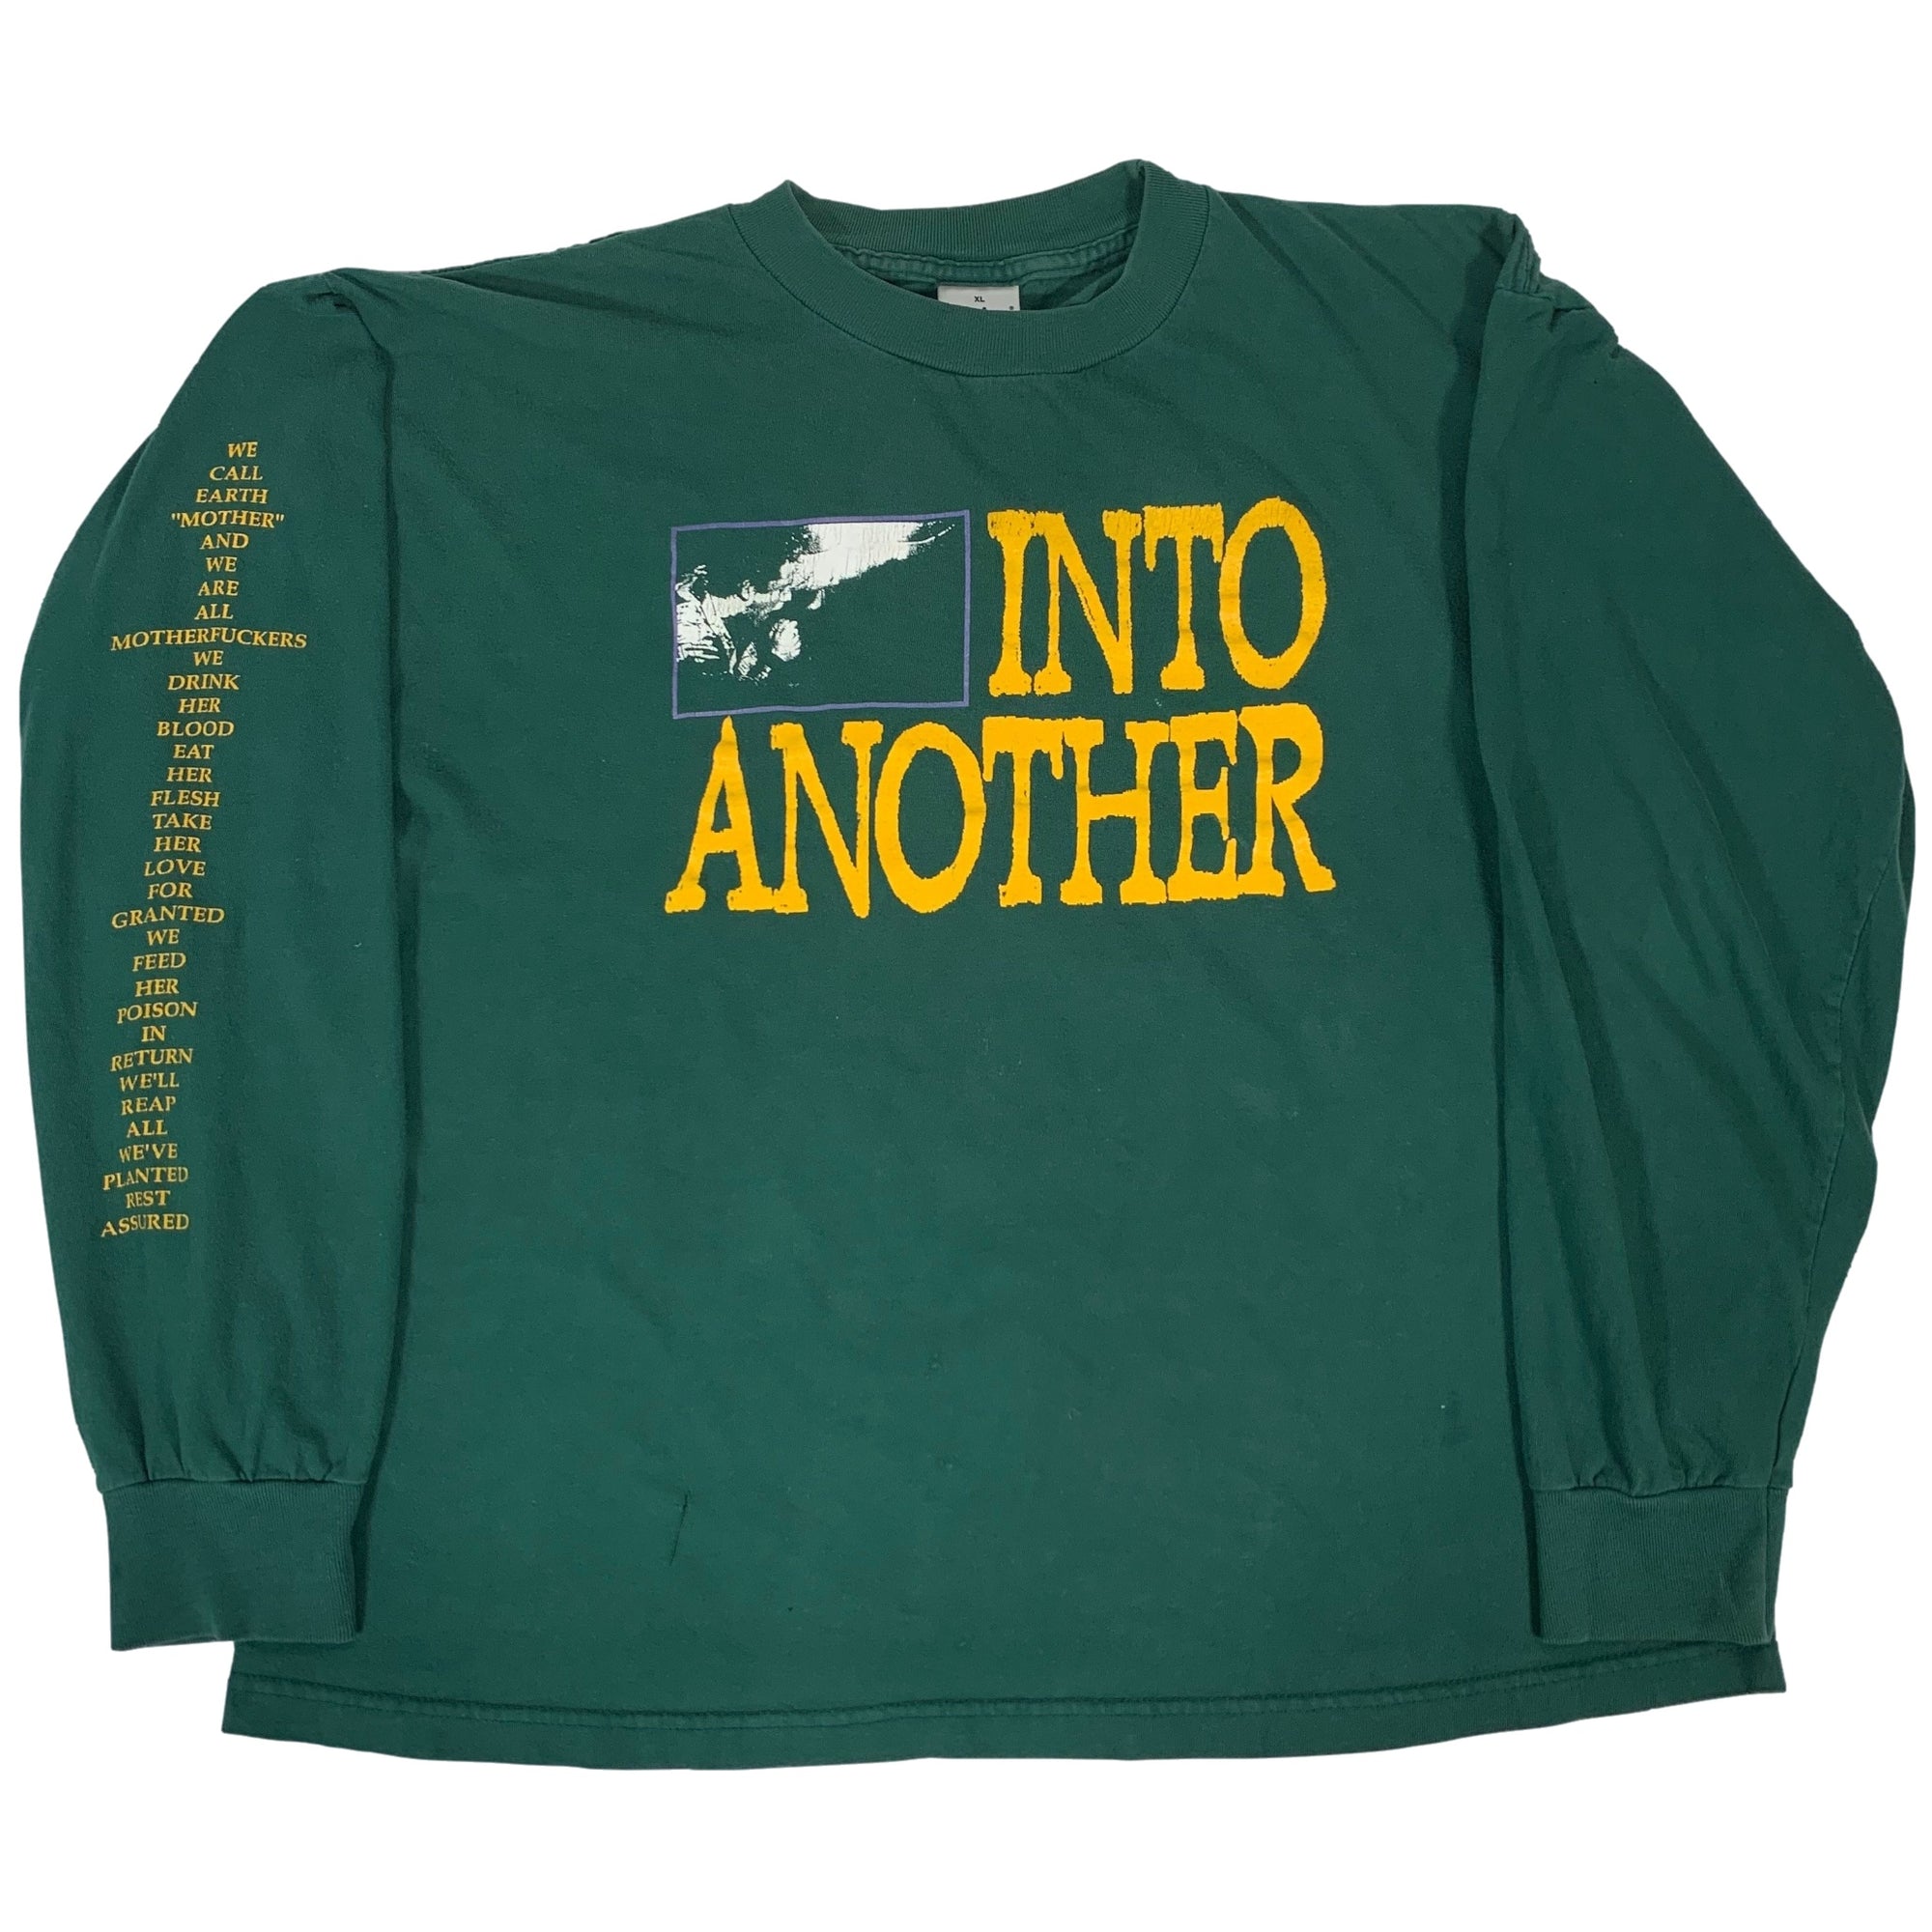 Vintage Into Another "Mother Earth" Long Sleeve Shirt - jointcustodydc